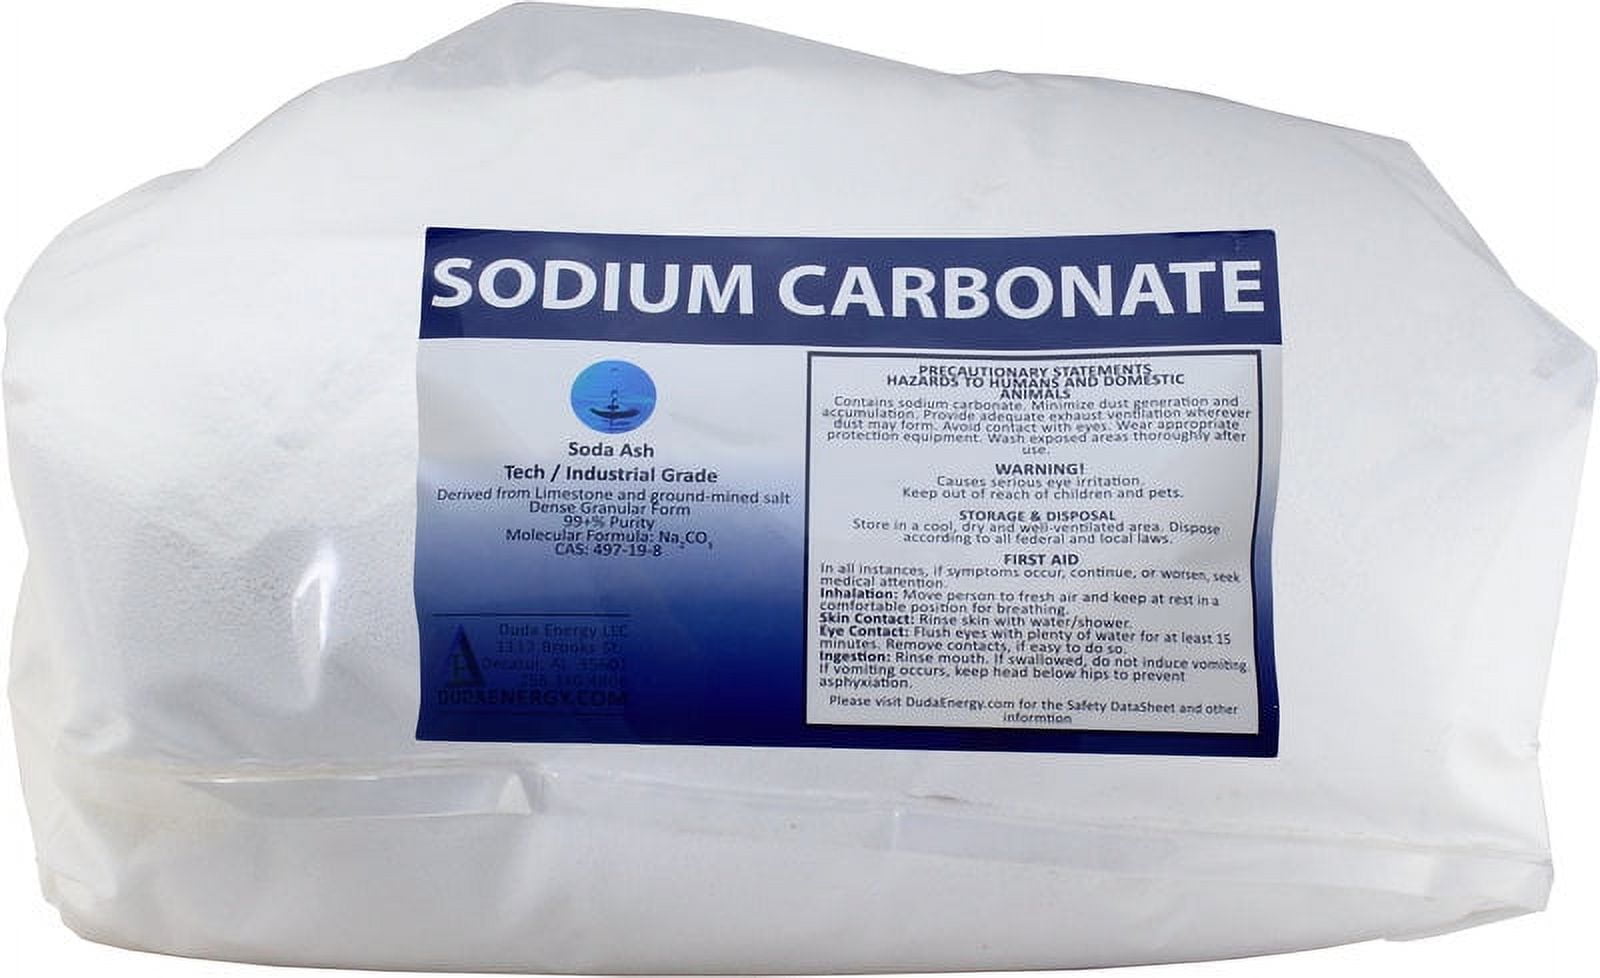 The Major Applications of Sodium Carbonate or Soda Ash